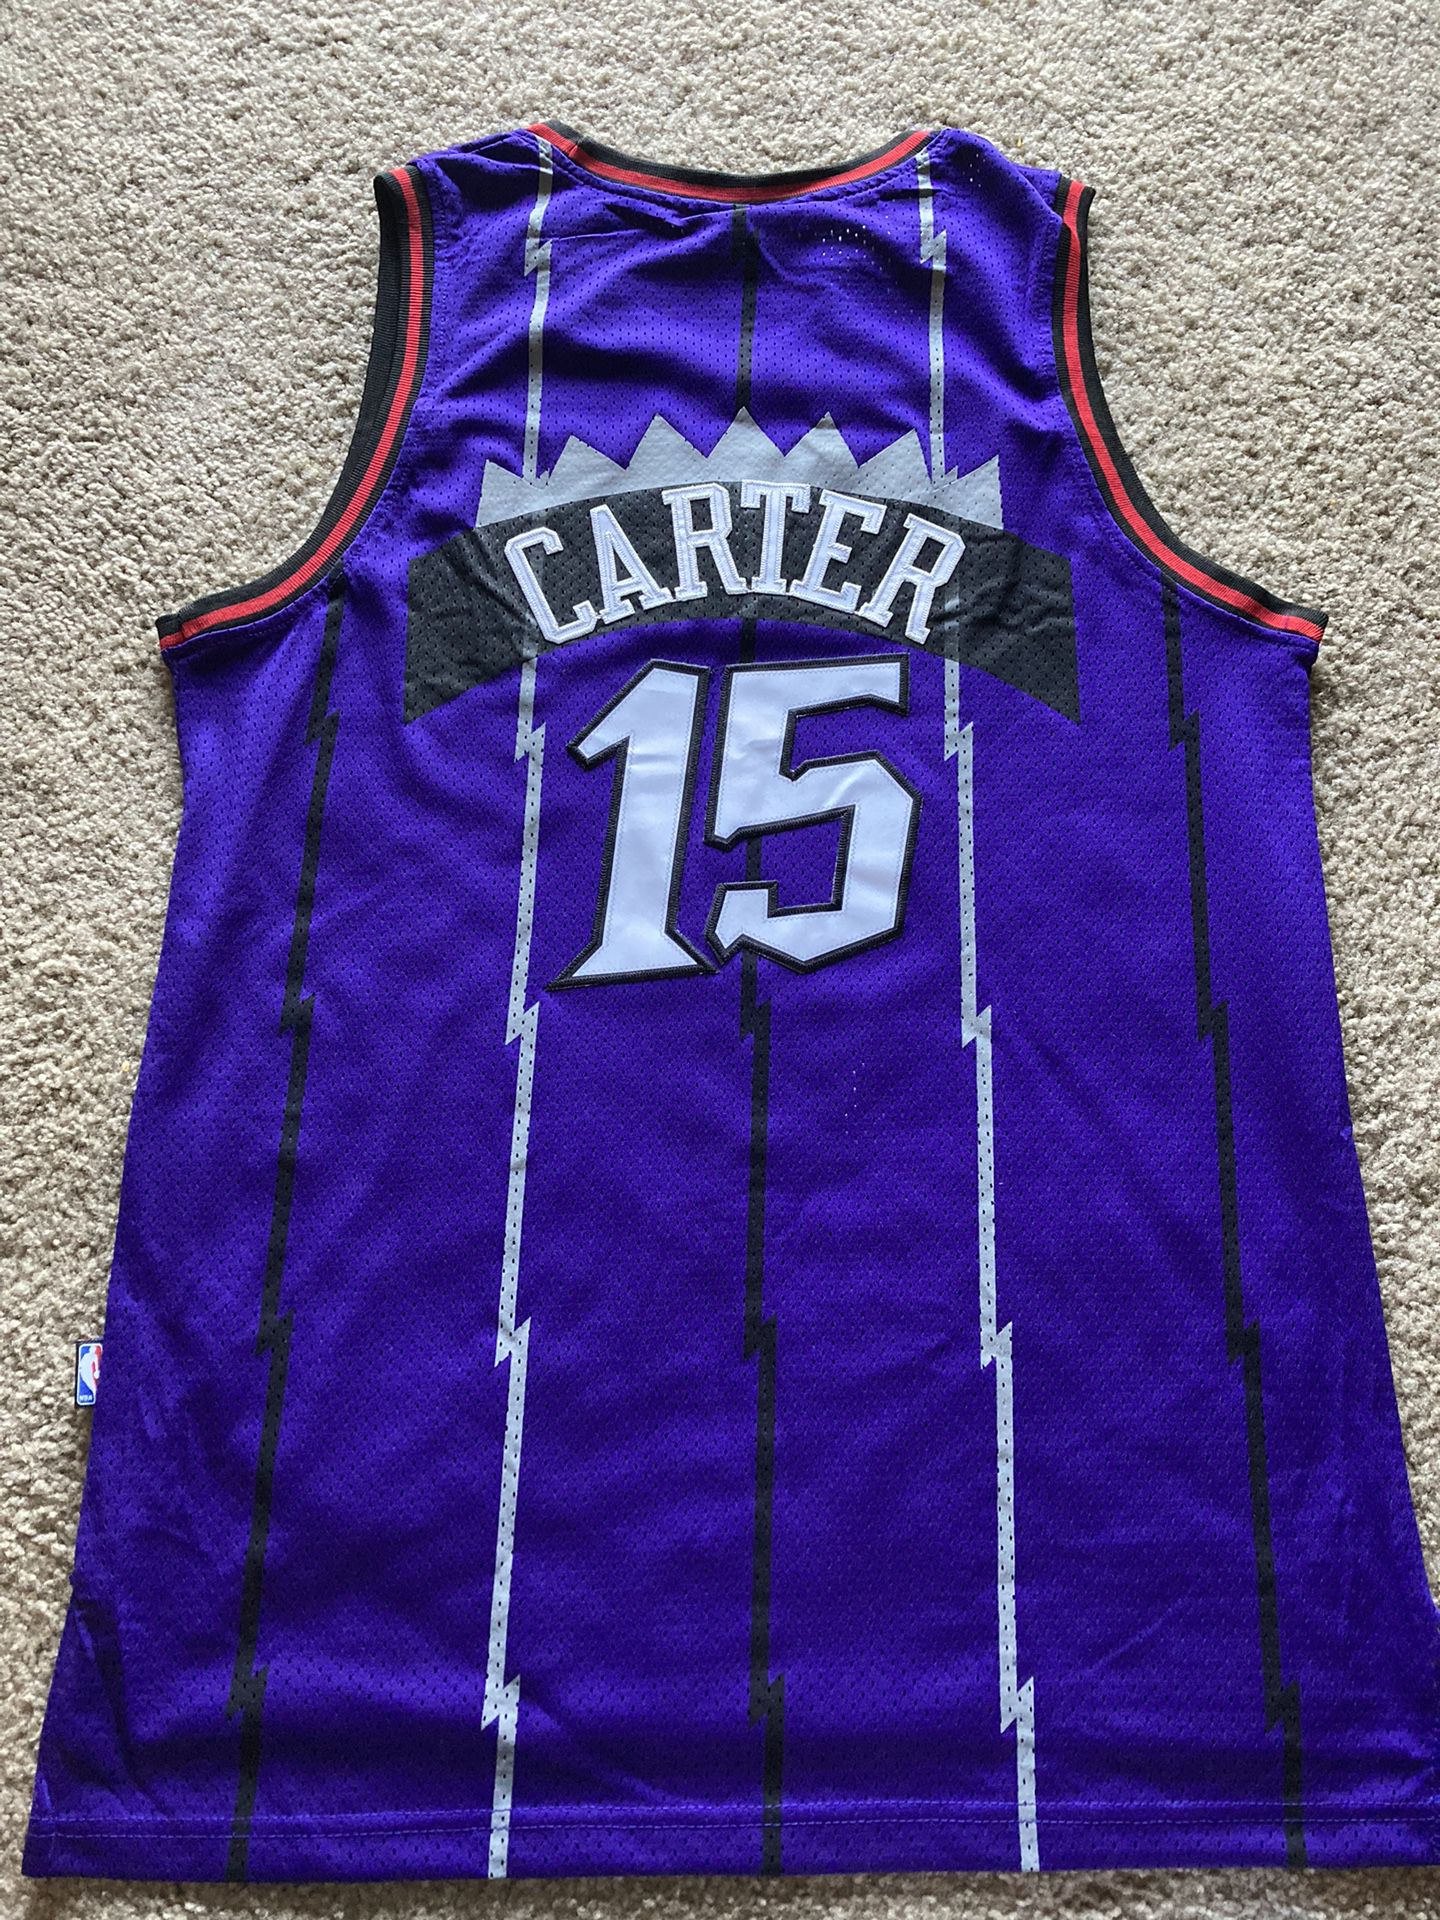 Vince Carter Toronto Raptors NBA Vintage Jersey New with Tags Size Small  for Sale in Tempe, AZ - OfferUp